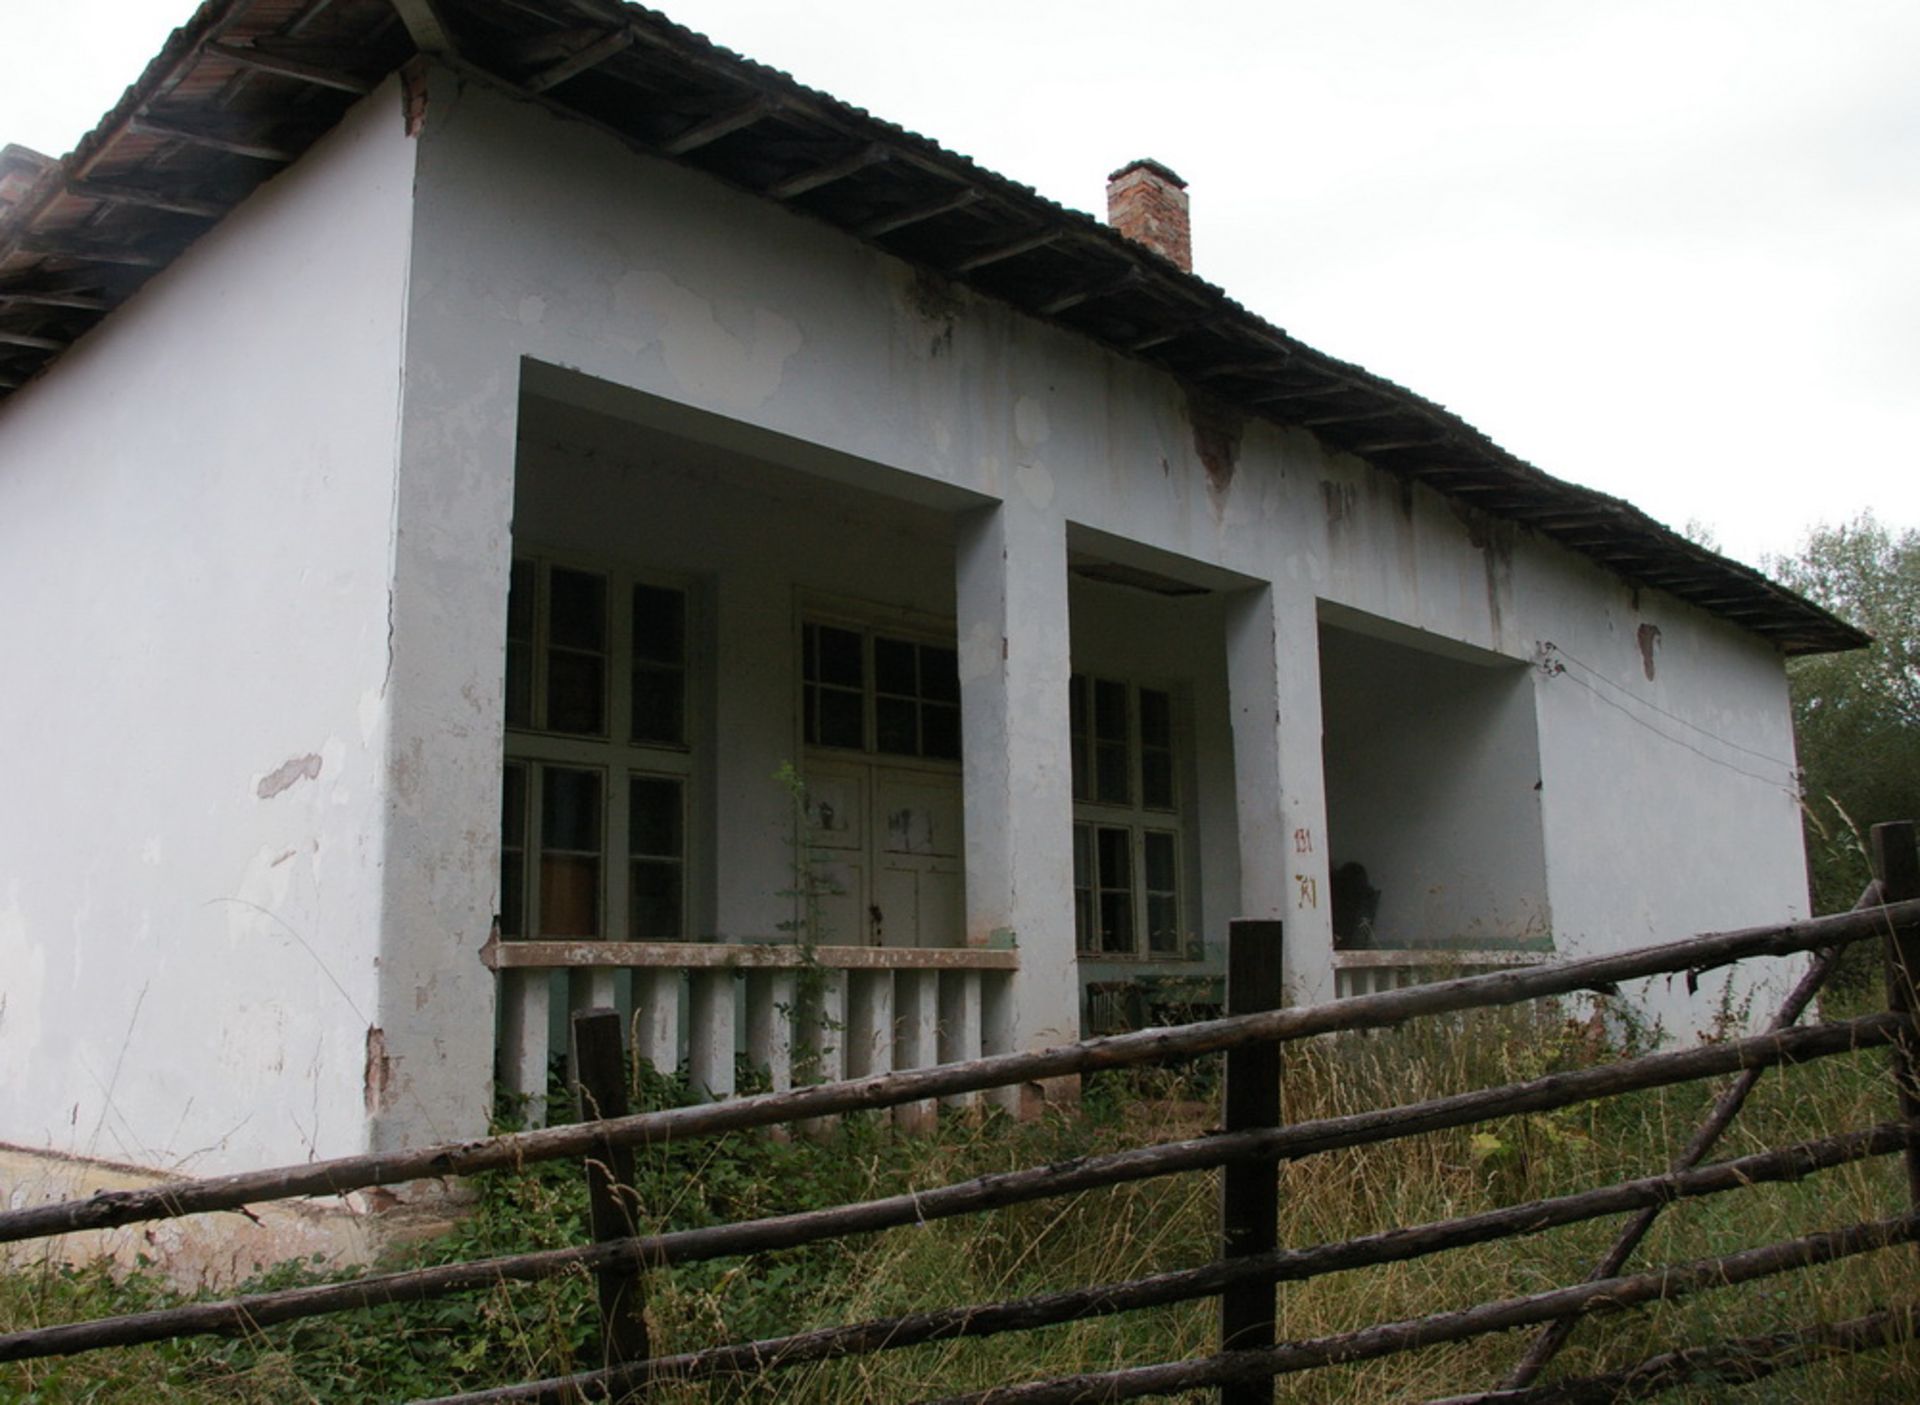 BD - Former state school with mountain views - one hour to the capital, Sofia + 2,000 sqm land - Image 14 of 17